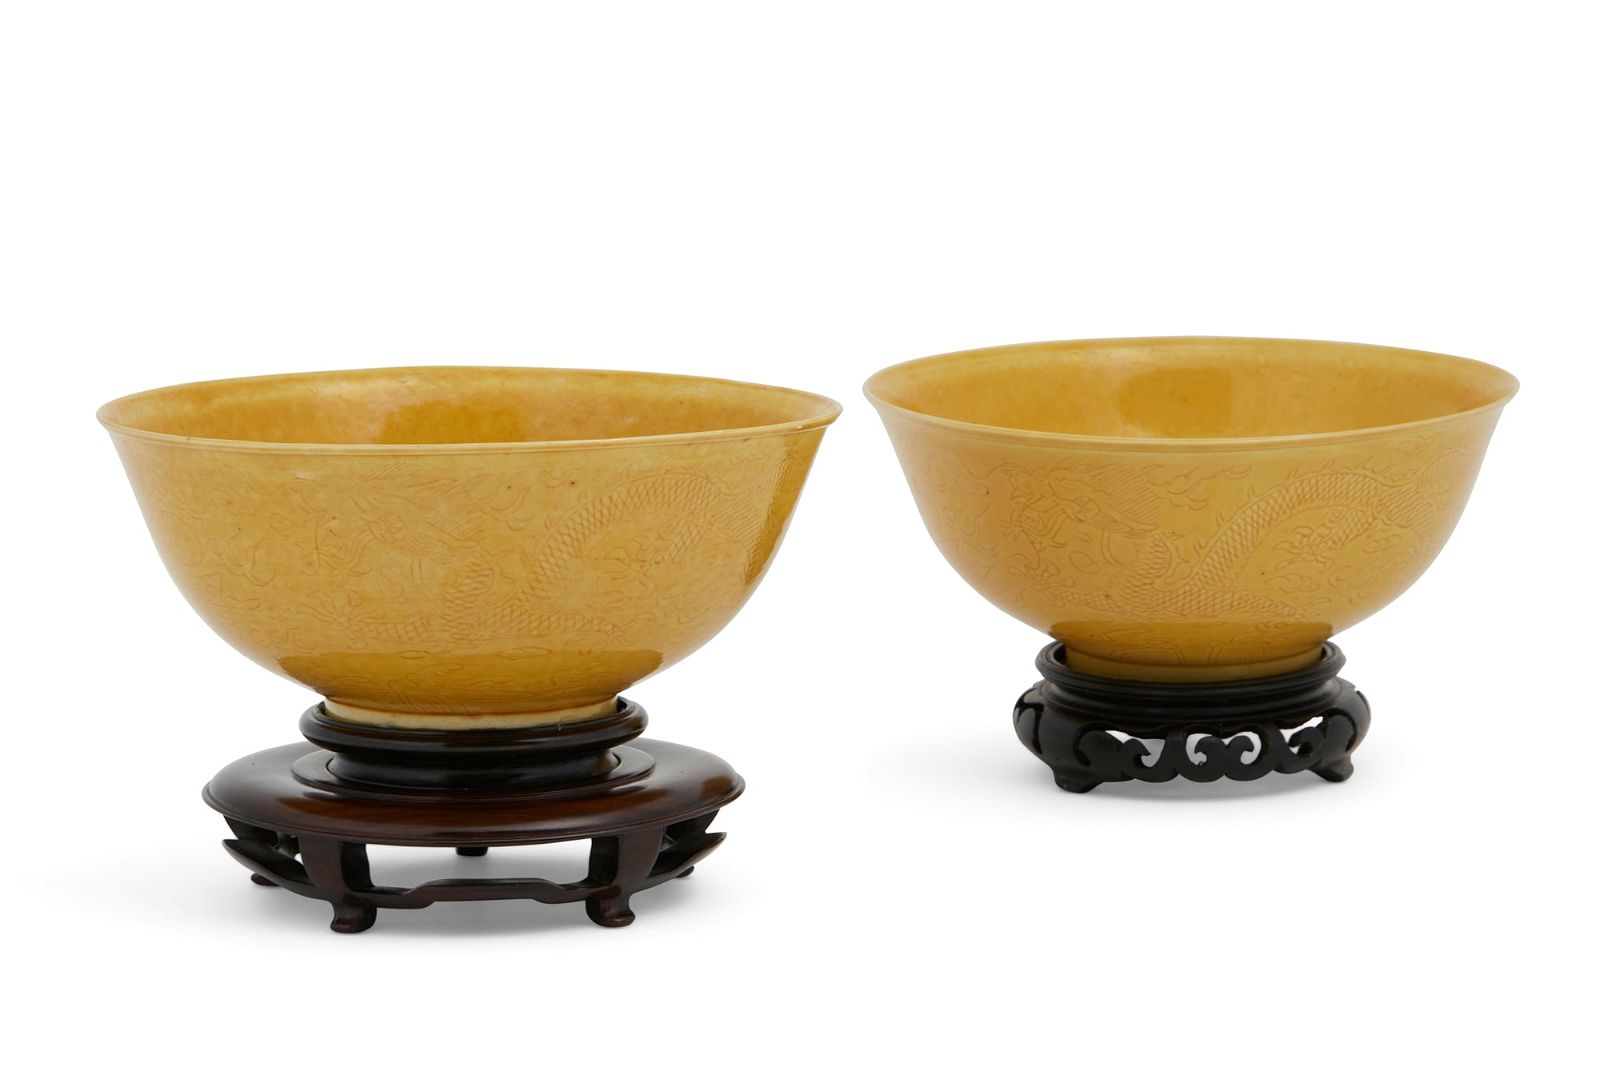 A PAIR OF CHINESE YELLOW GLAZED